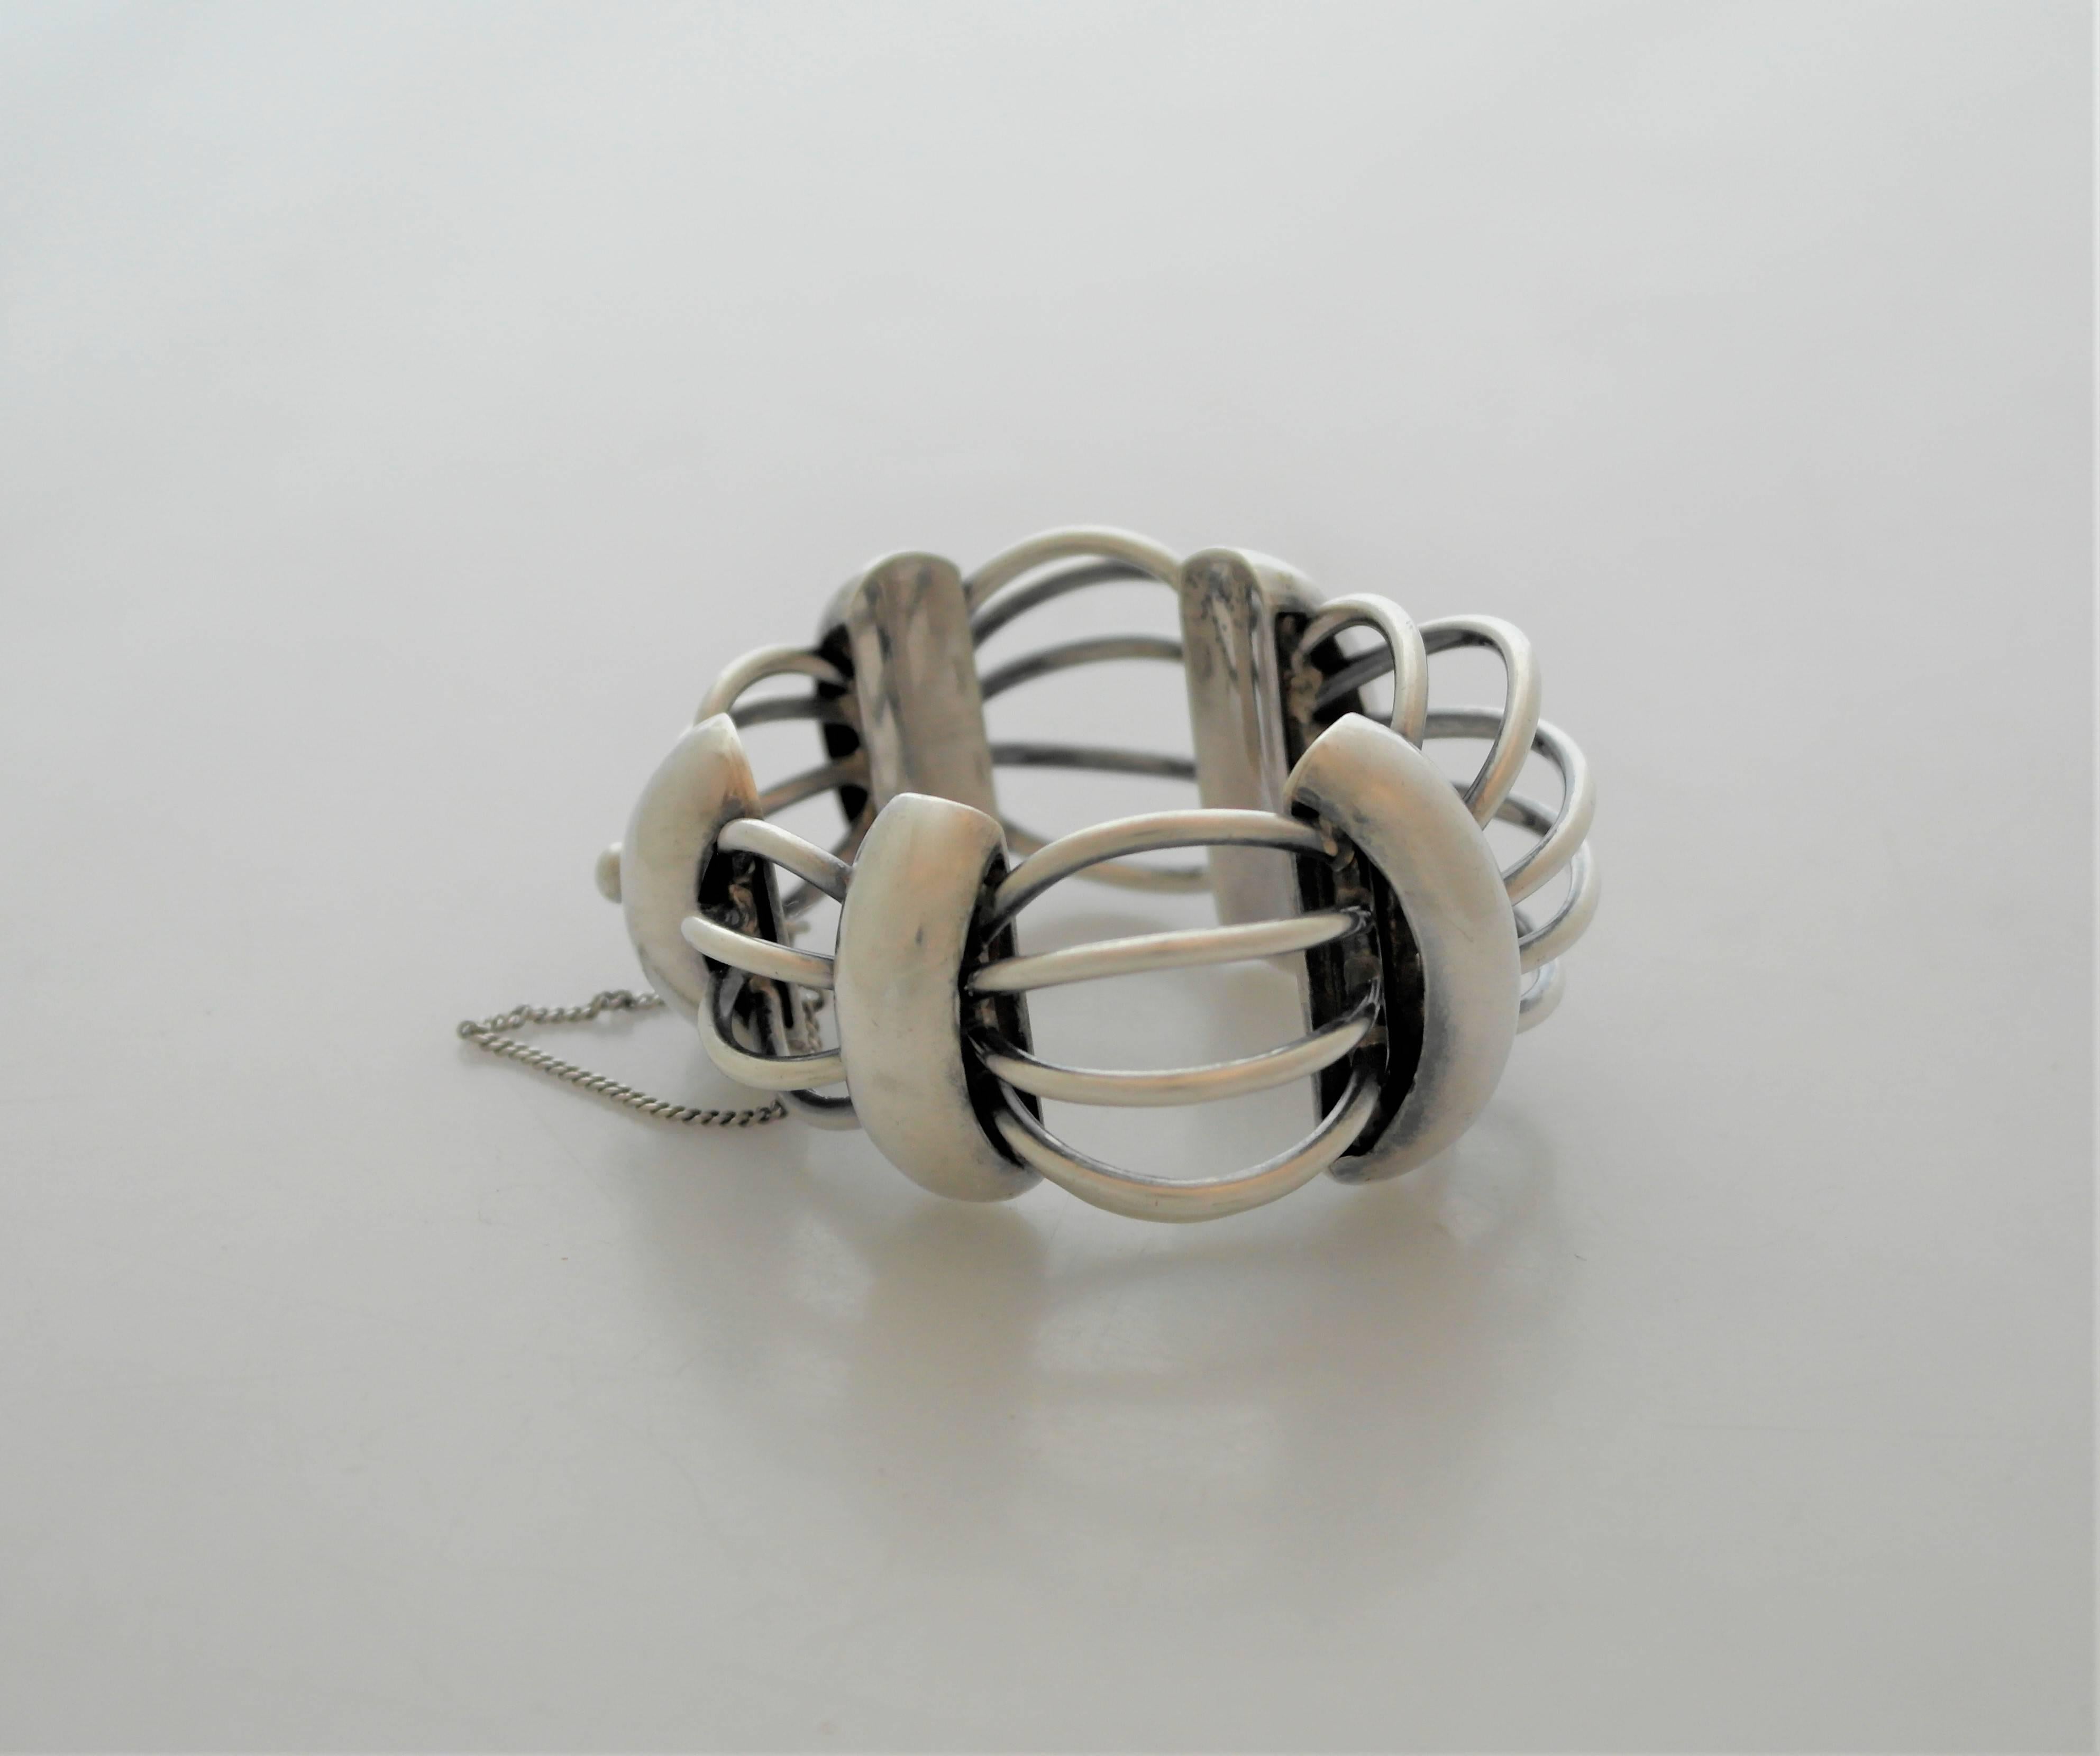 Being offered is a circa 1960 sterling silver bracelet made by Antonio Pineda of Taxco, Mexico. This example is known as the birdcage design; made of heavy gauge silver links. Tongue & box closure with security chain. Wearable wrist size is 6